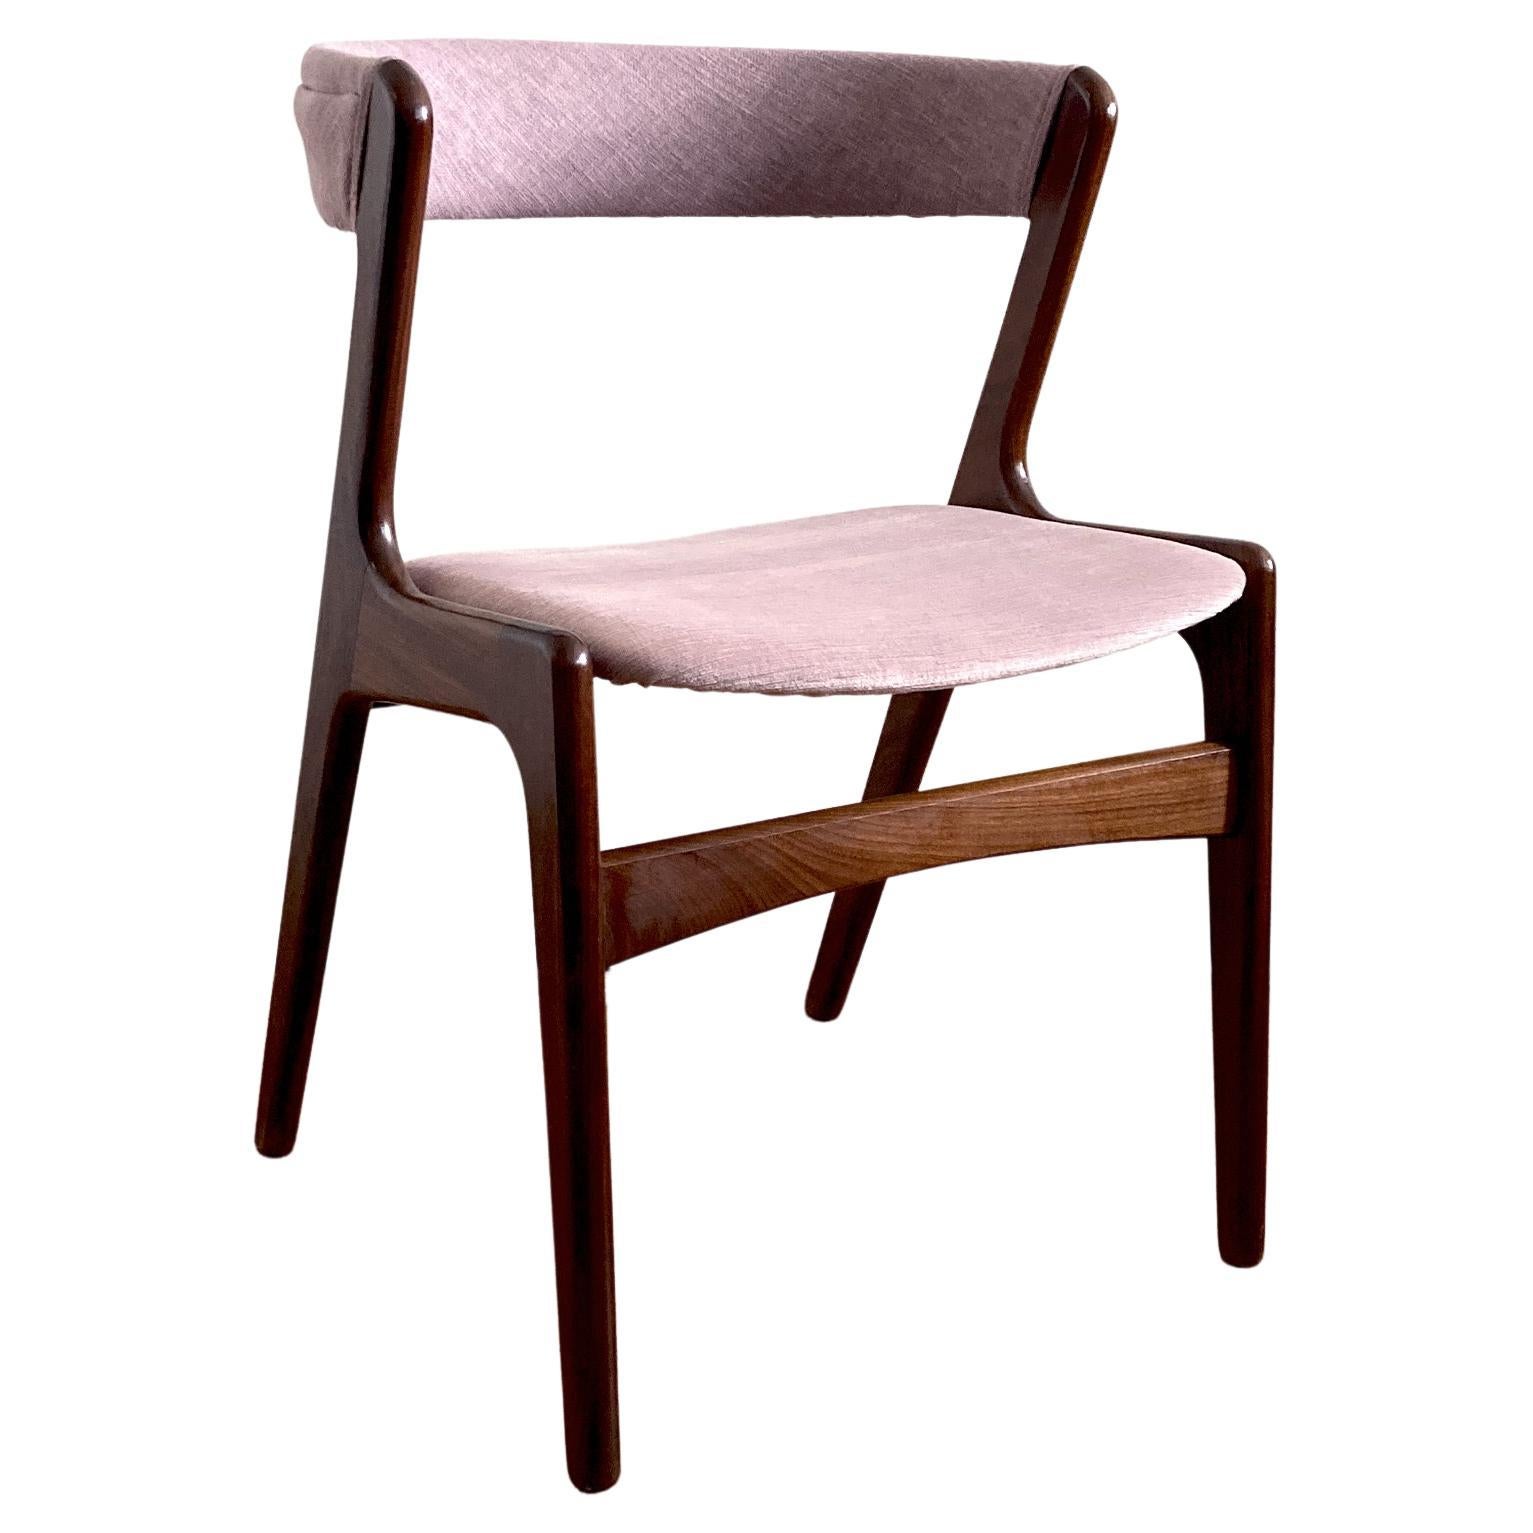 Kai Kristiansen Mauve Pink Curved Back Chair, 1960s For Sale